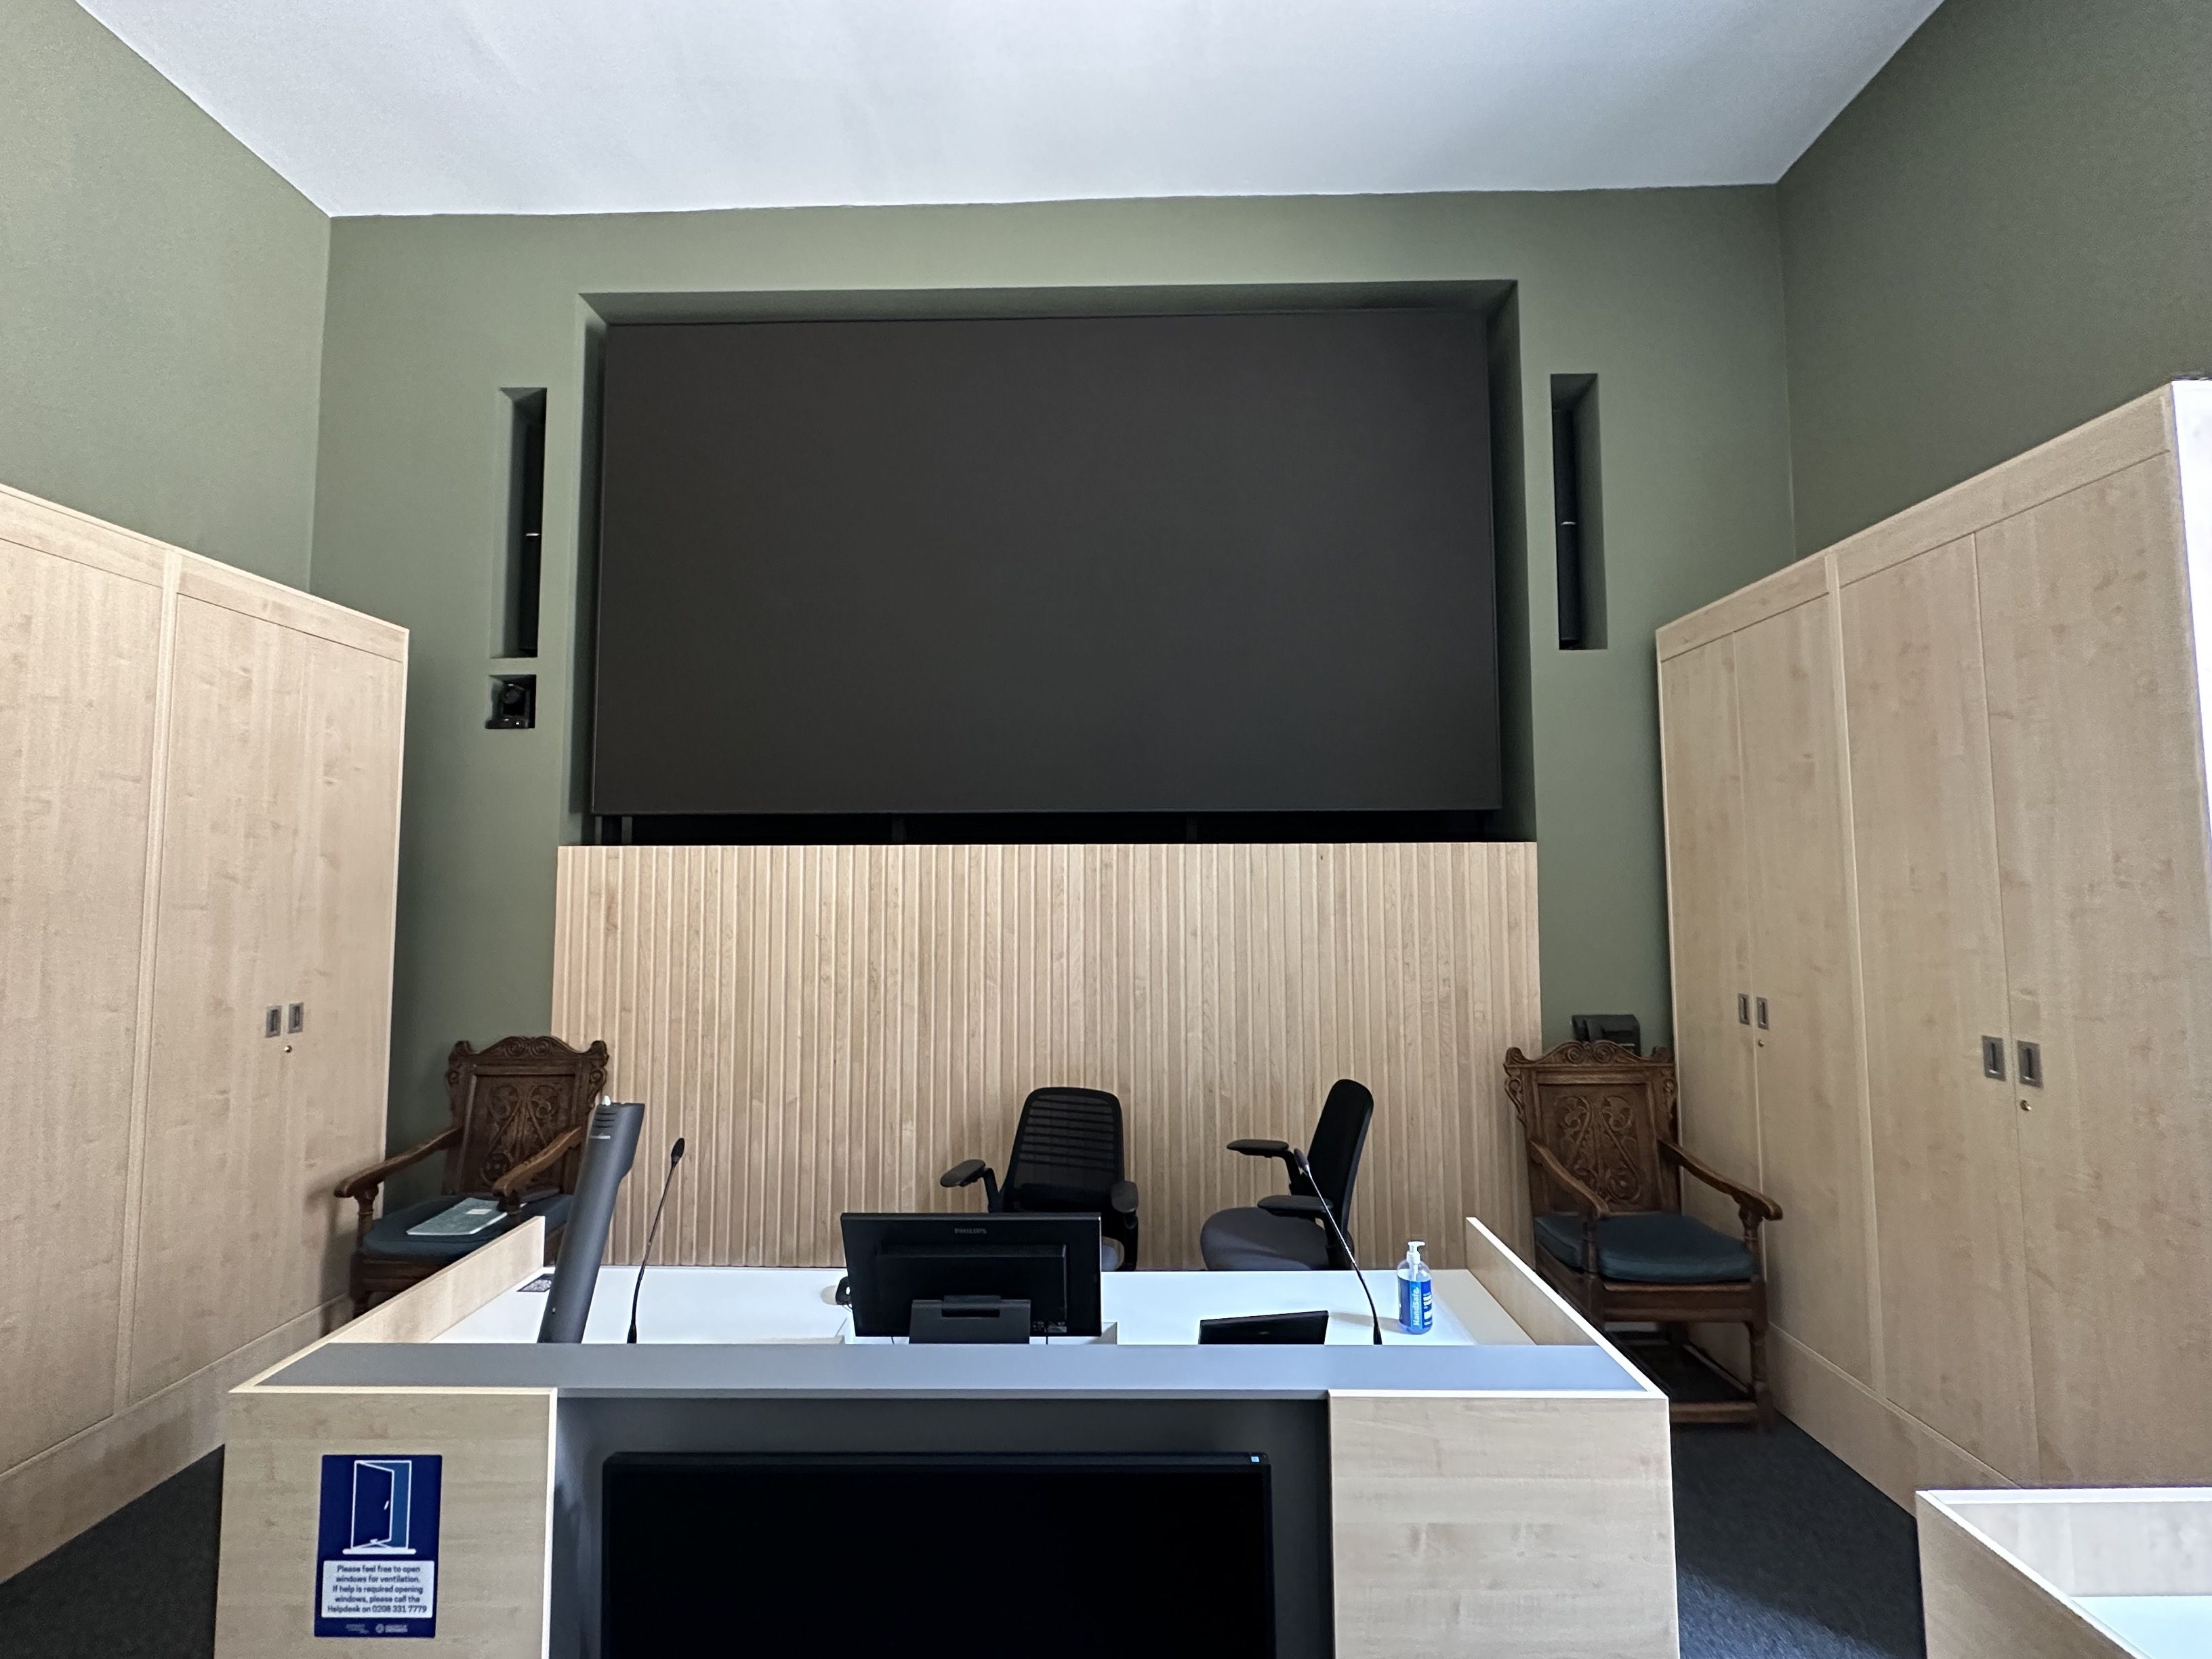 Given the extensive use of Sennheiser audio solutions by the University of Greenwich, like the Evolution Series and SpeechLine, the team were confident in the superior quality technology offered by Sennheiser products for their classrooms and lecture halls